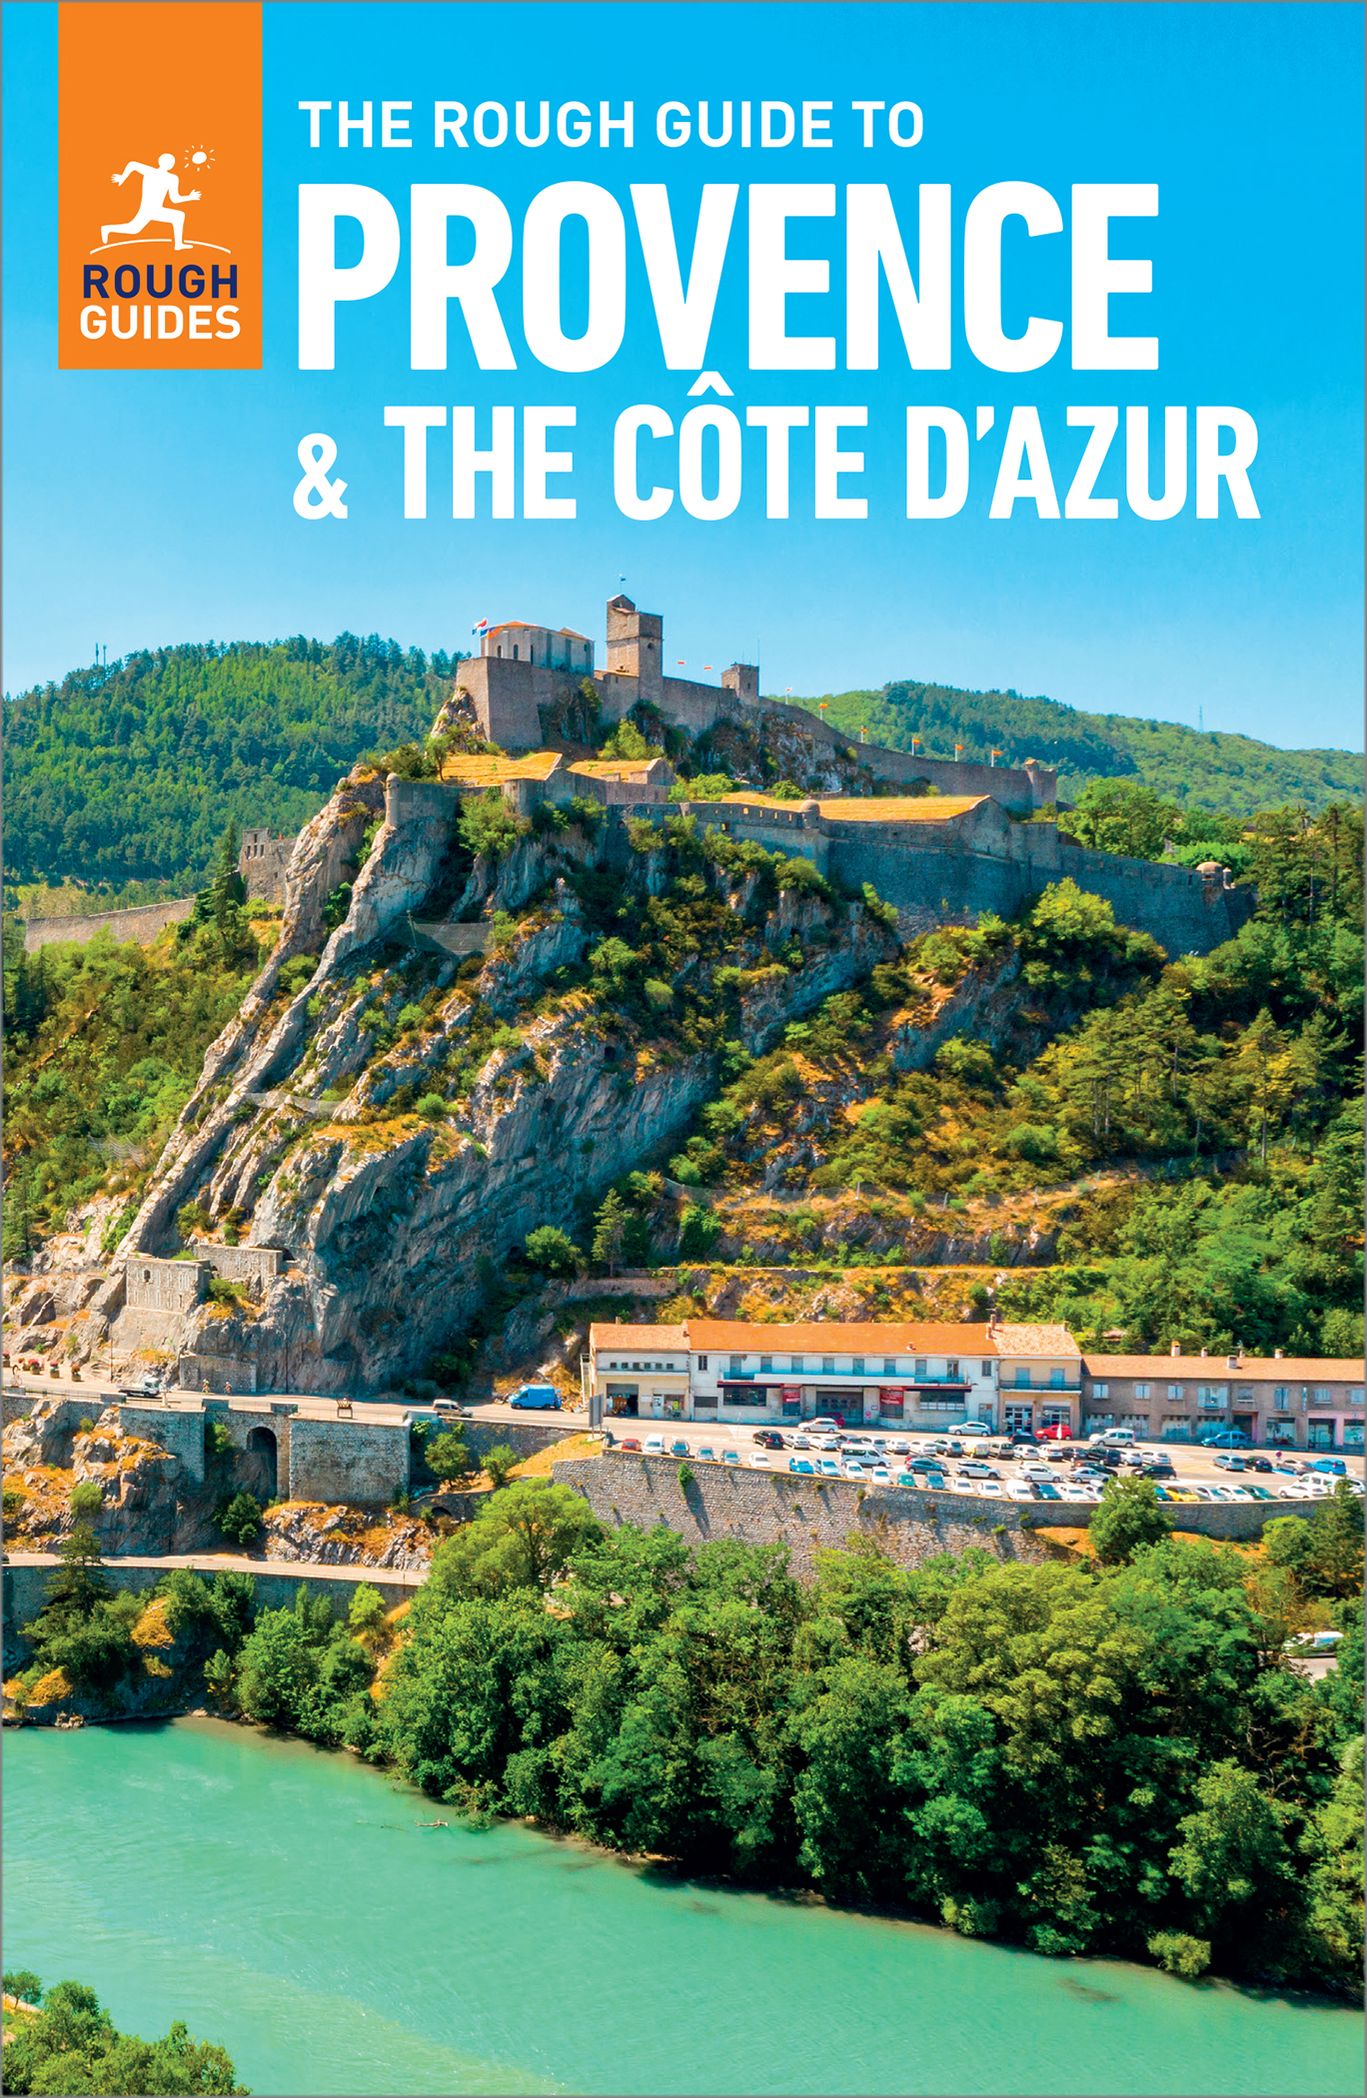 The Rough Guide to Provence &amp; the Cote d&amp;#39;Azur (Rough Guides Main Series ...